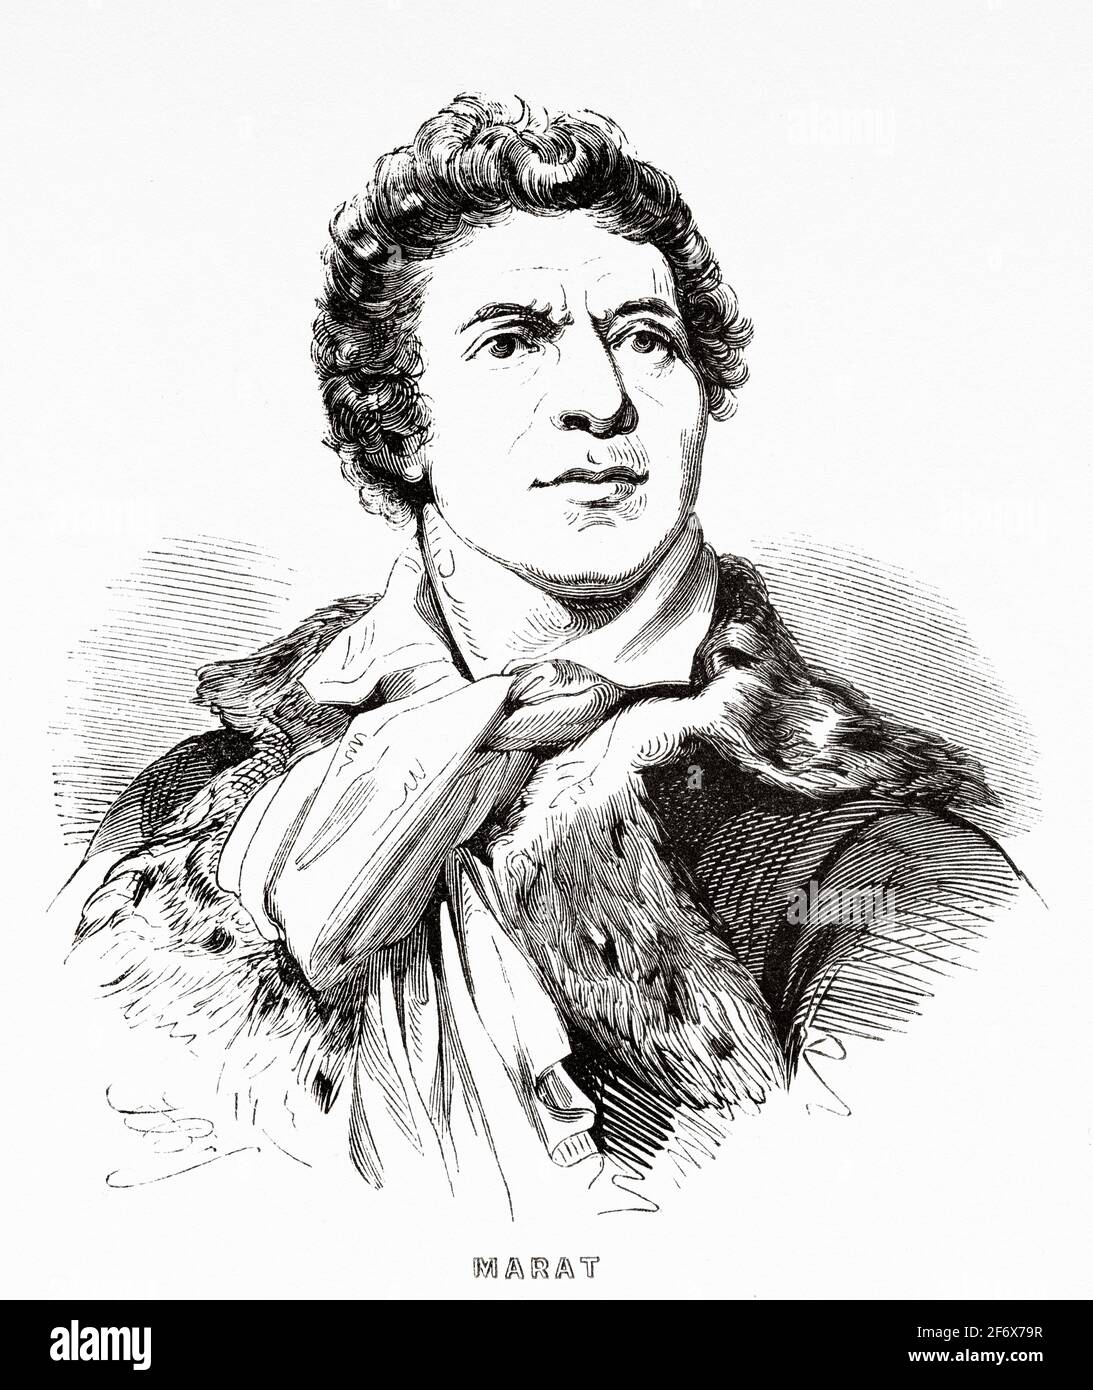 Portrait of Jean-Paul Marat (1743-1793) Physician, scientist and political theorist. France, French Revolution 18th century. Old engraved illustration from Histoire de la Revolution Francaise 1845 Stock Photo